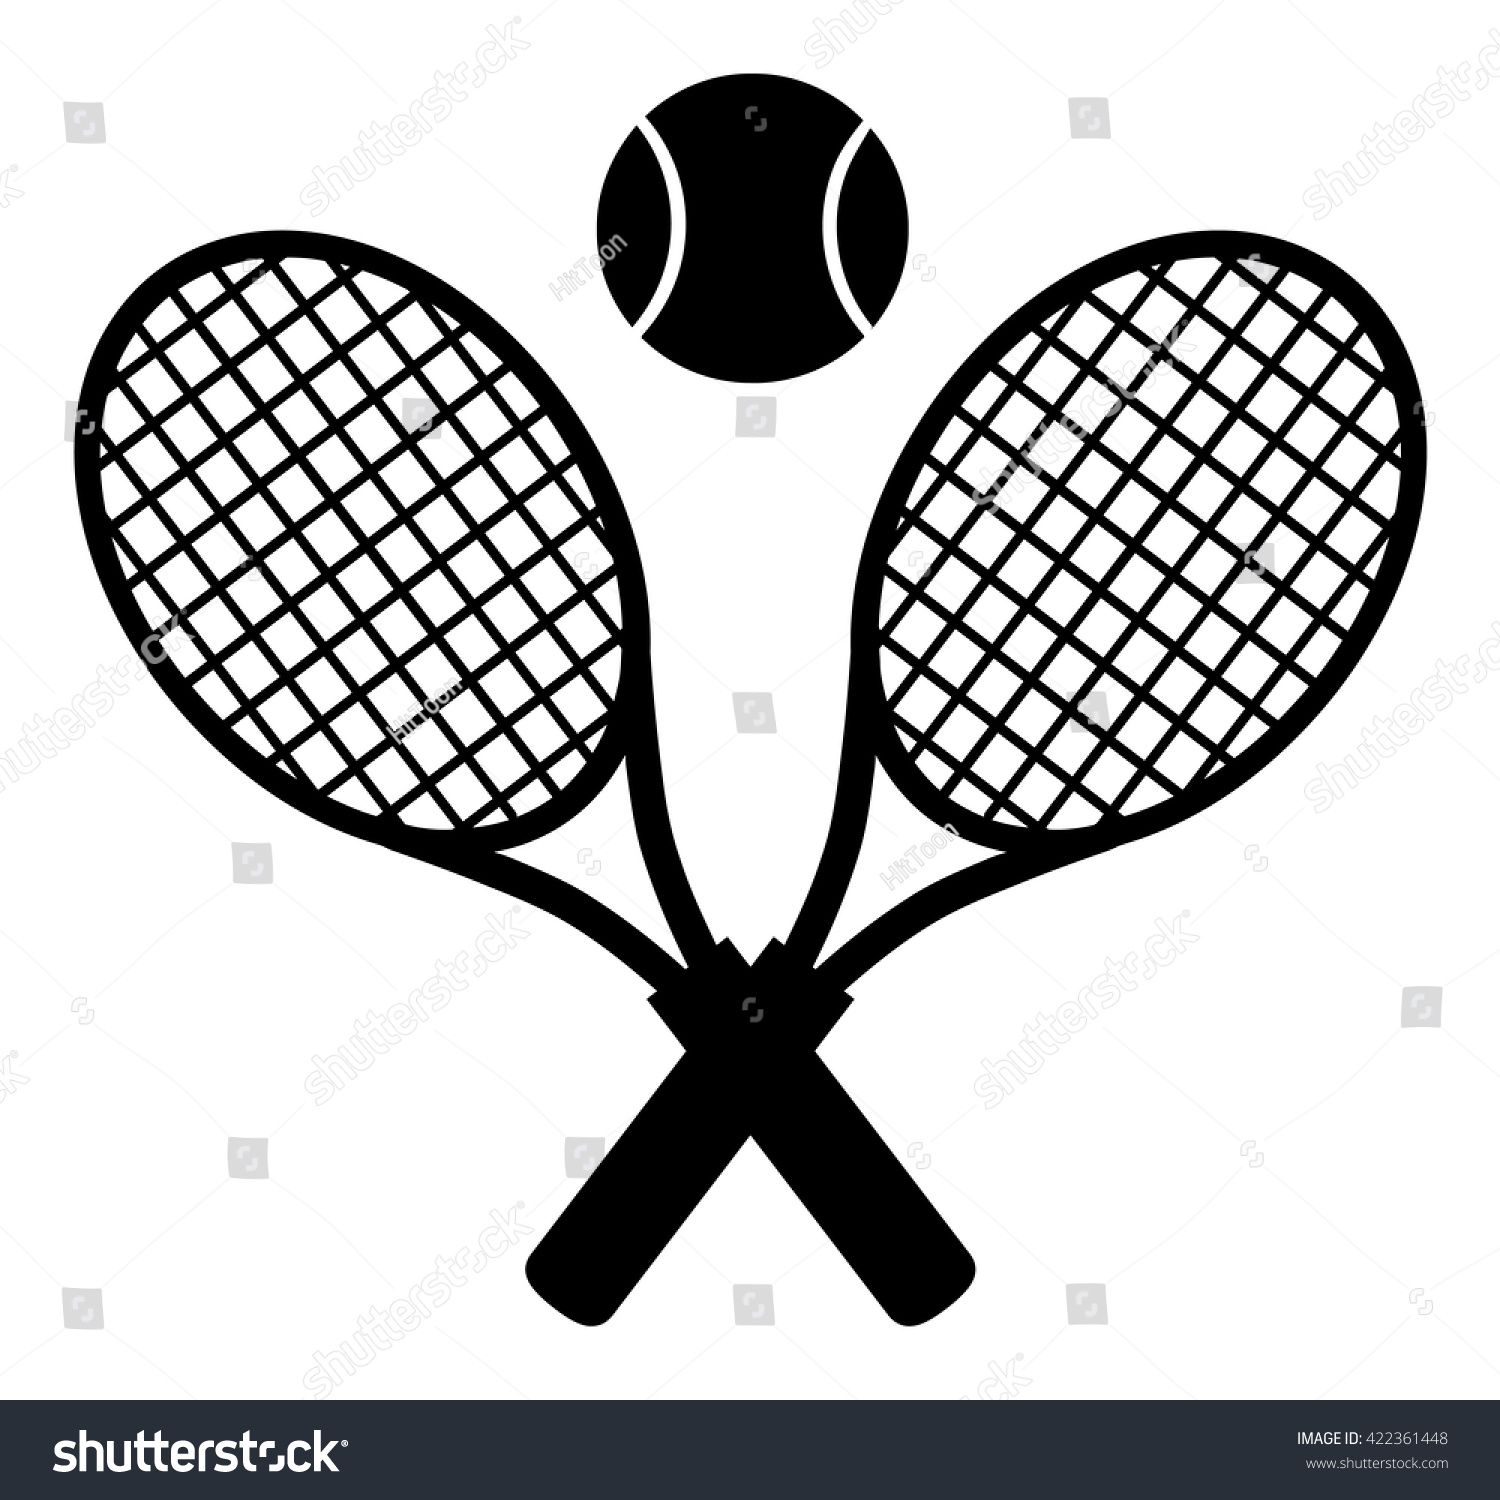 Crossed Racket And Tennis Ball Black Silhouette. Vector.